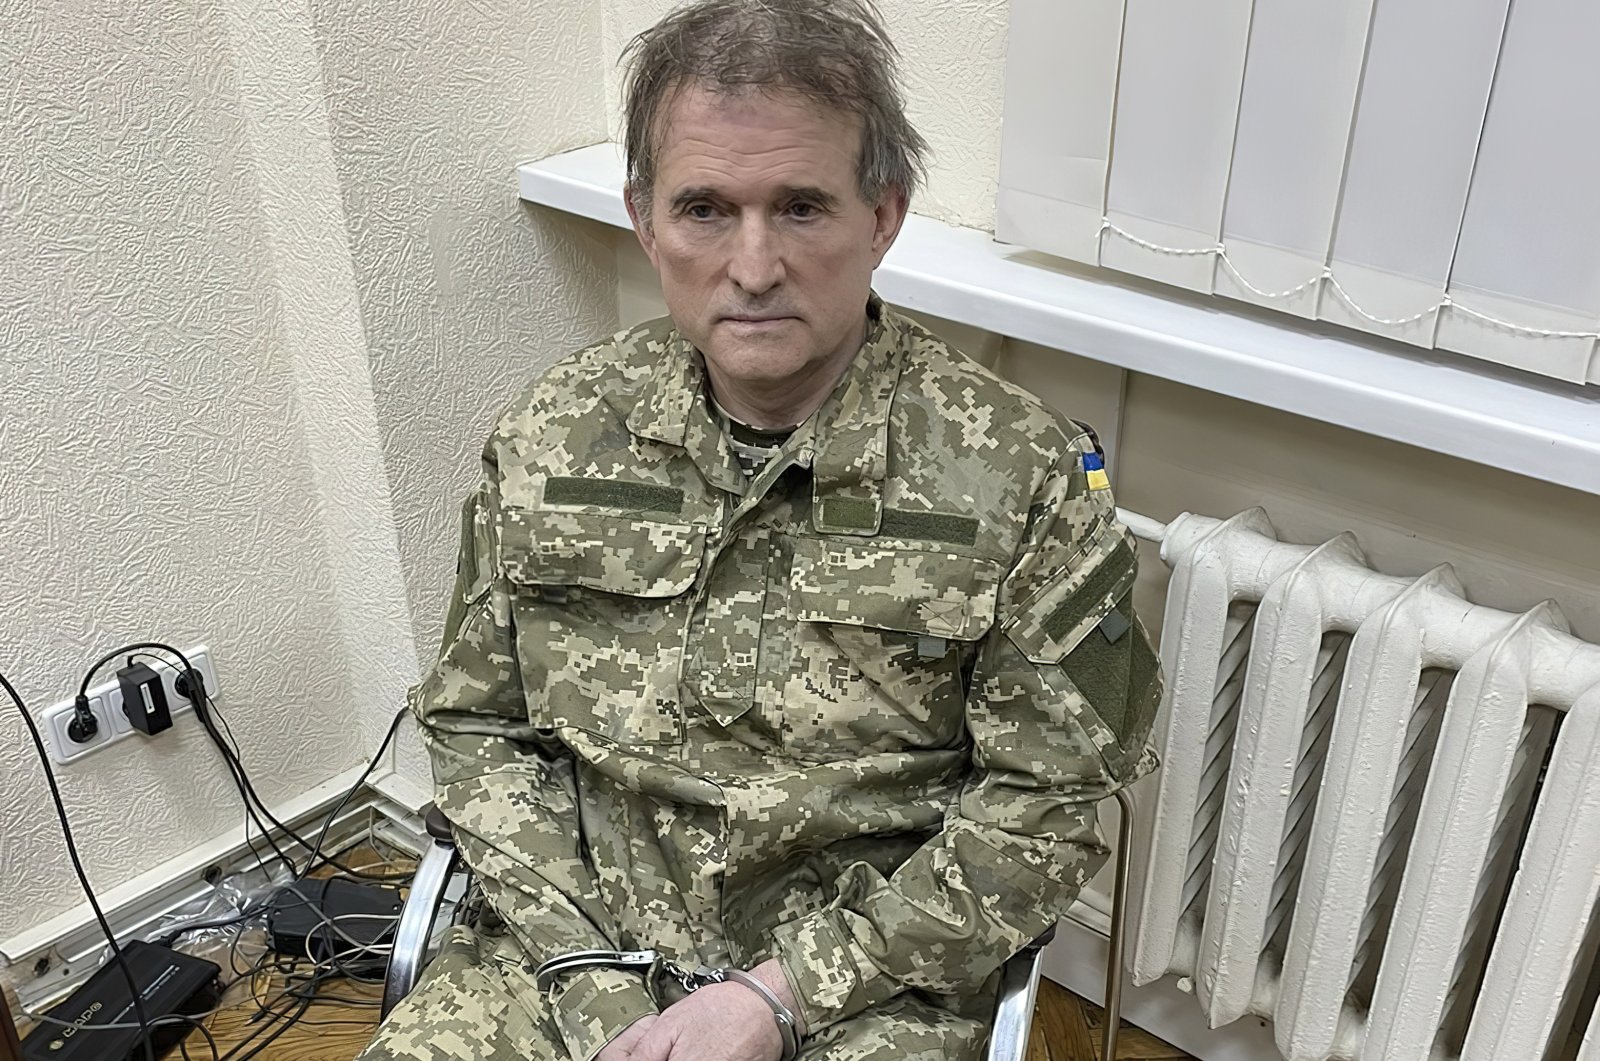 Oligarch Viktor Medvedchuk, who is both the former leader of a pro-Russian opposition party and a close associate of Russian leader Vladimir Putin, sits handcuffed after being detained in a special operation carried out by the country&#039;s SBU secret service, Ukraine, April 12, 2022. (AP Photo)